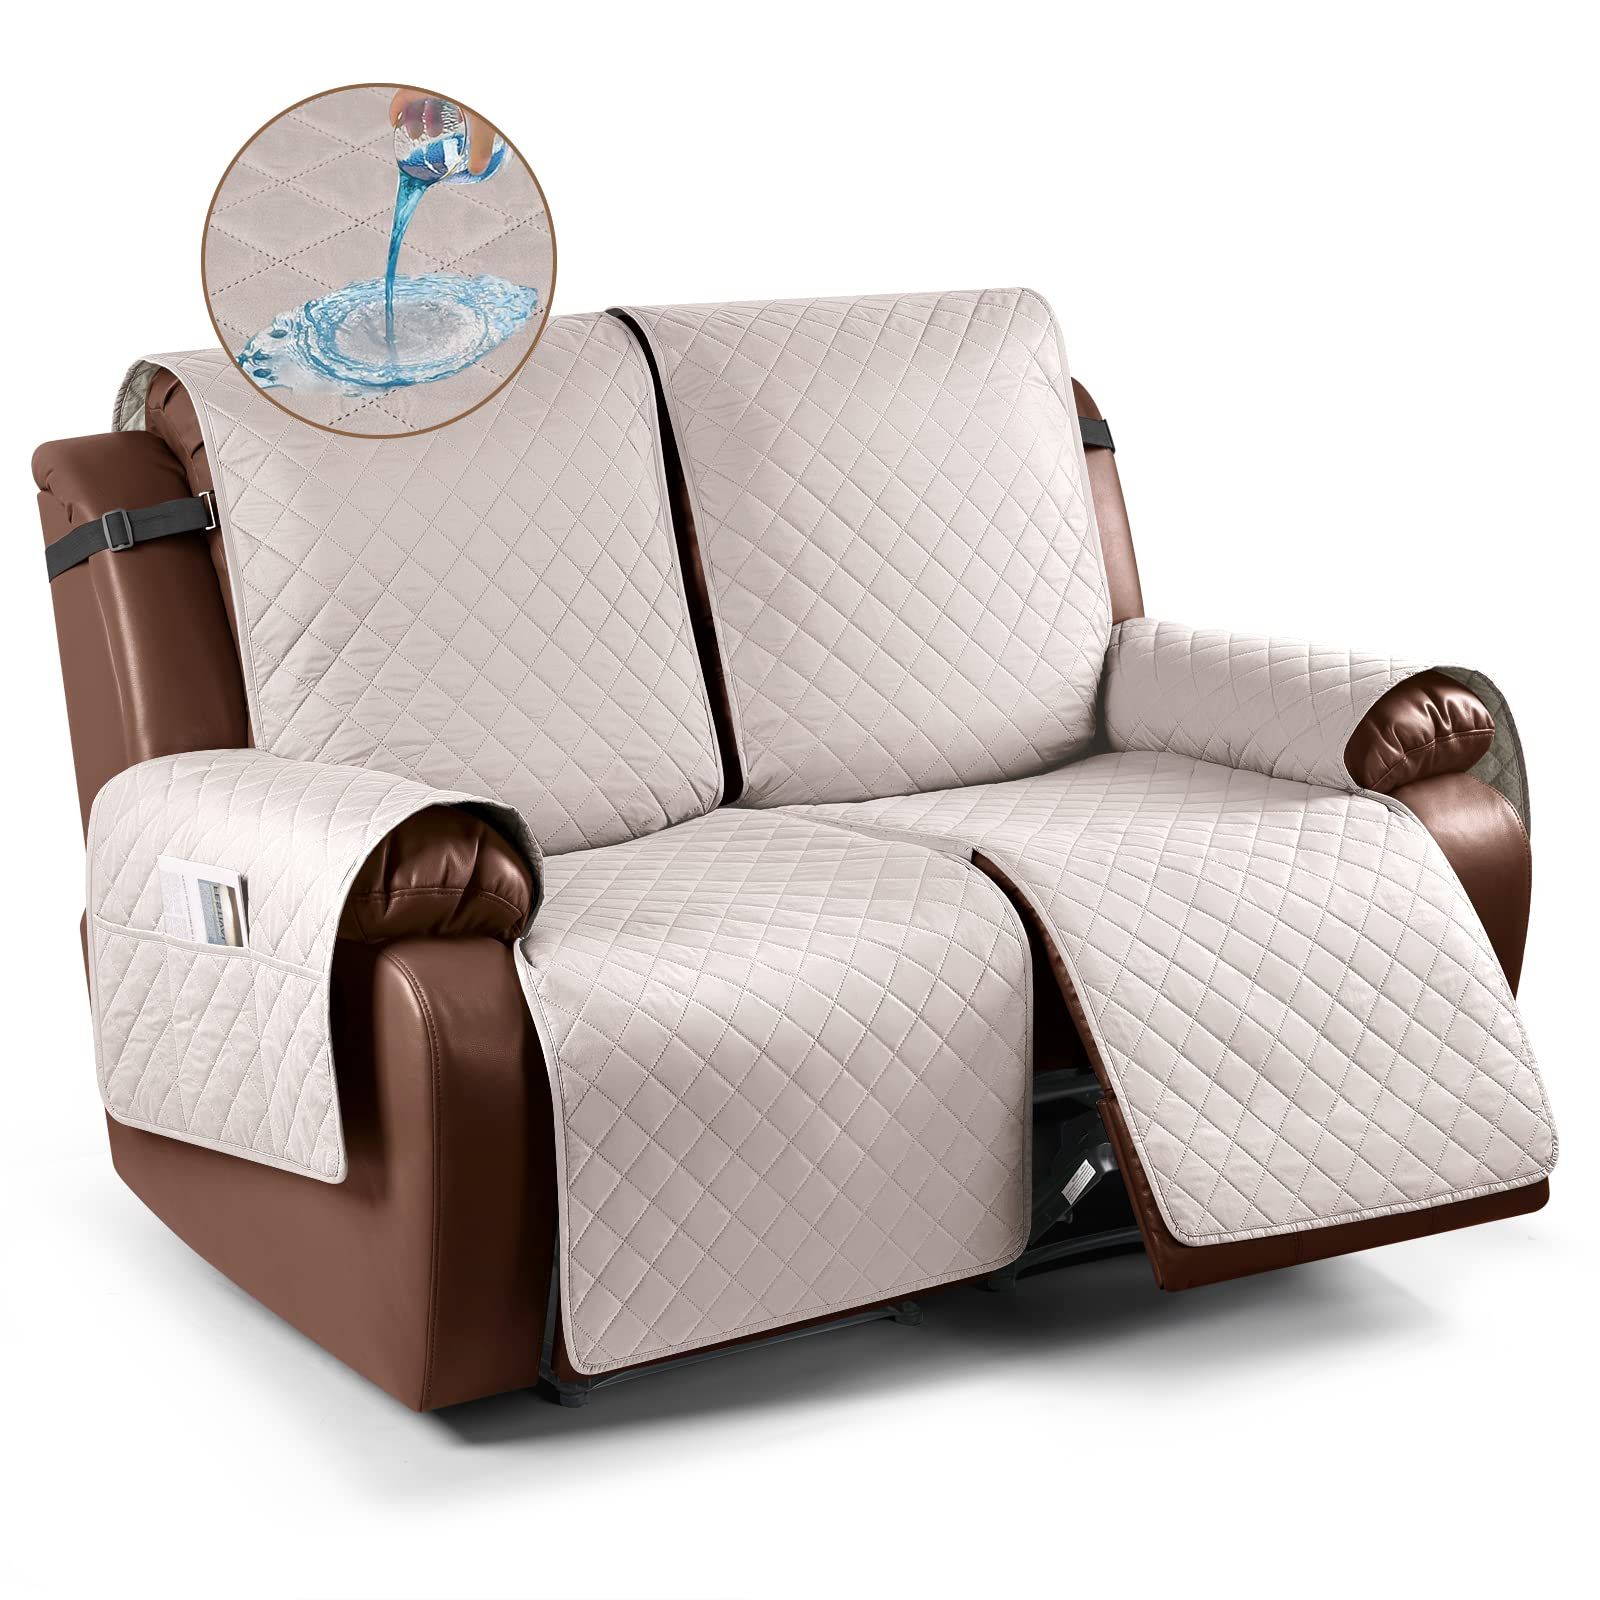 Loveseat Recliner Covers Ideas To Try